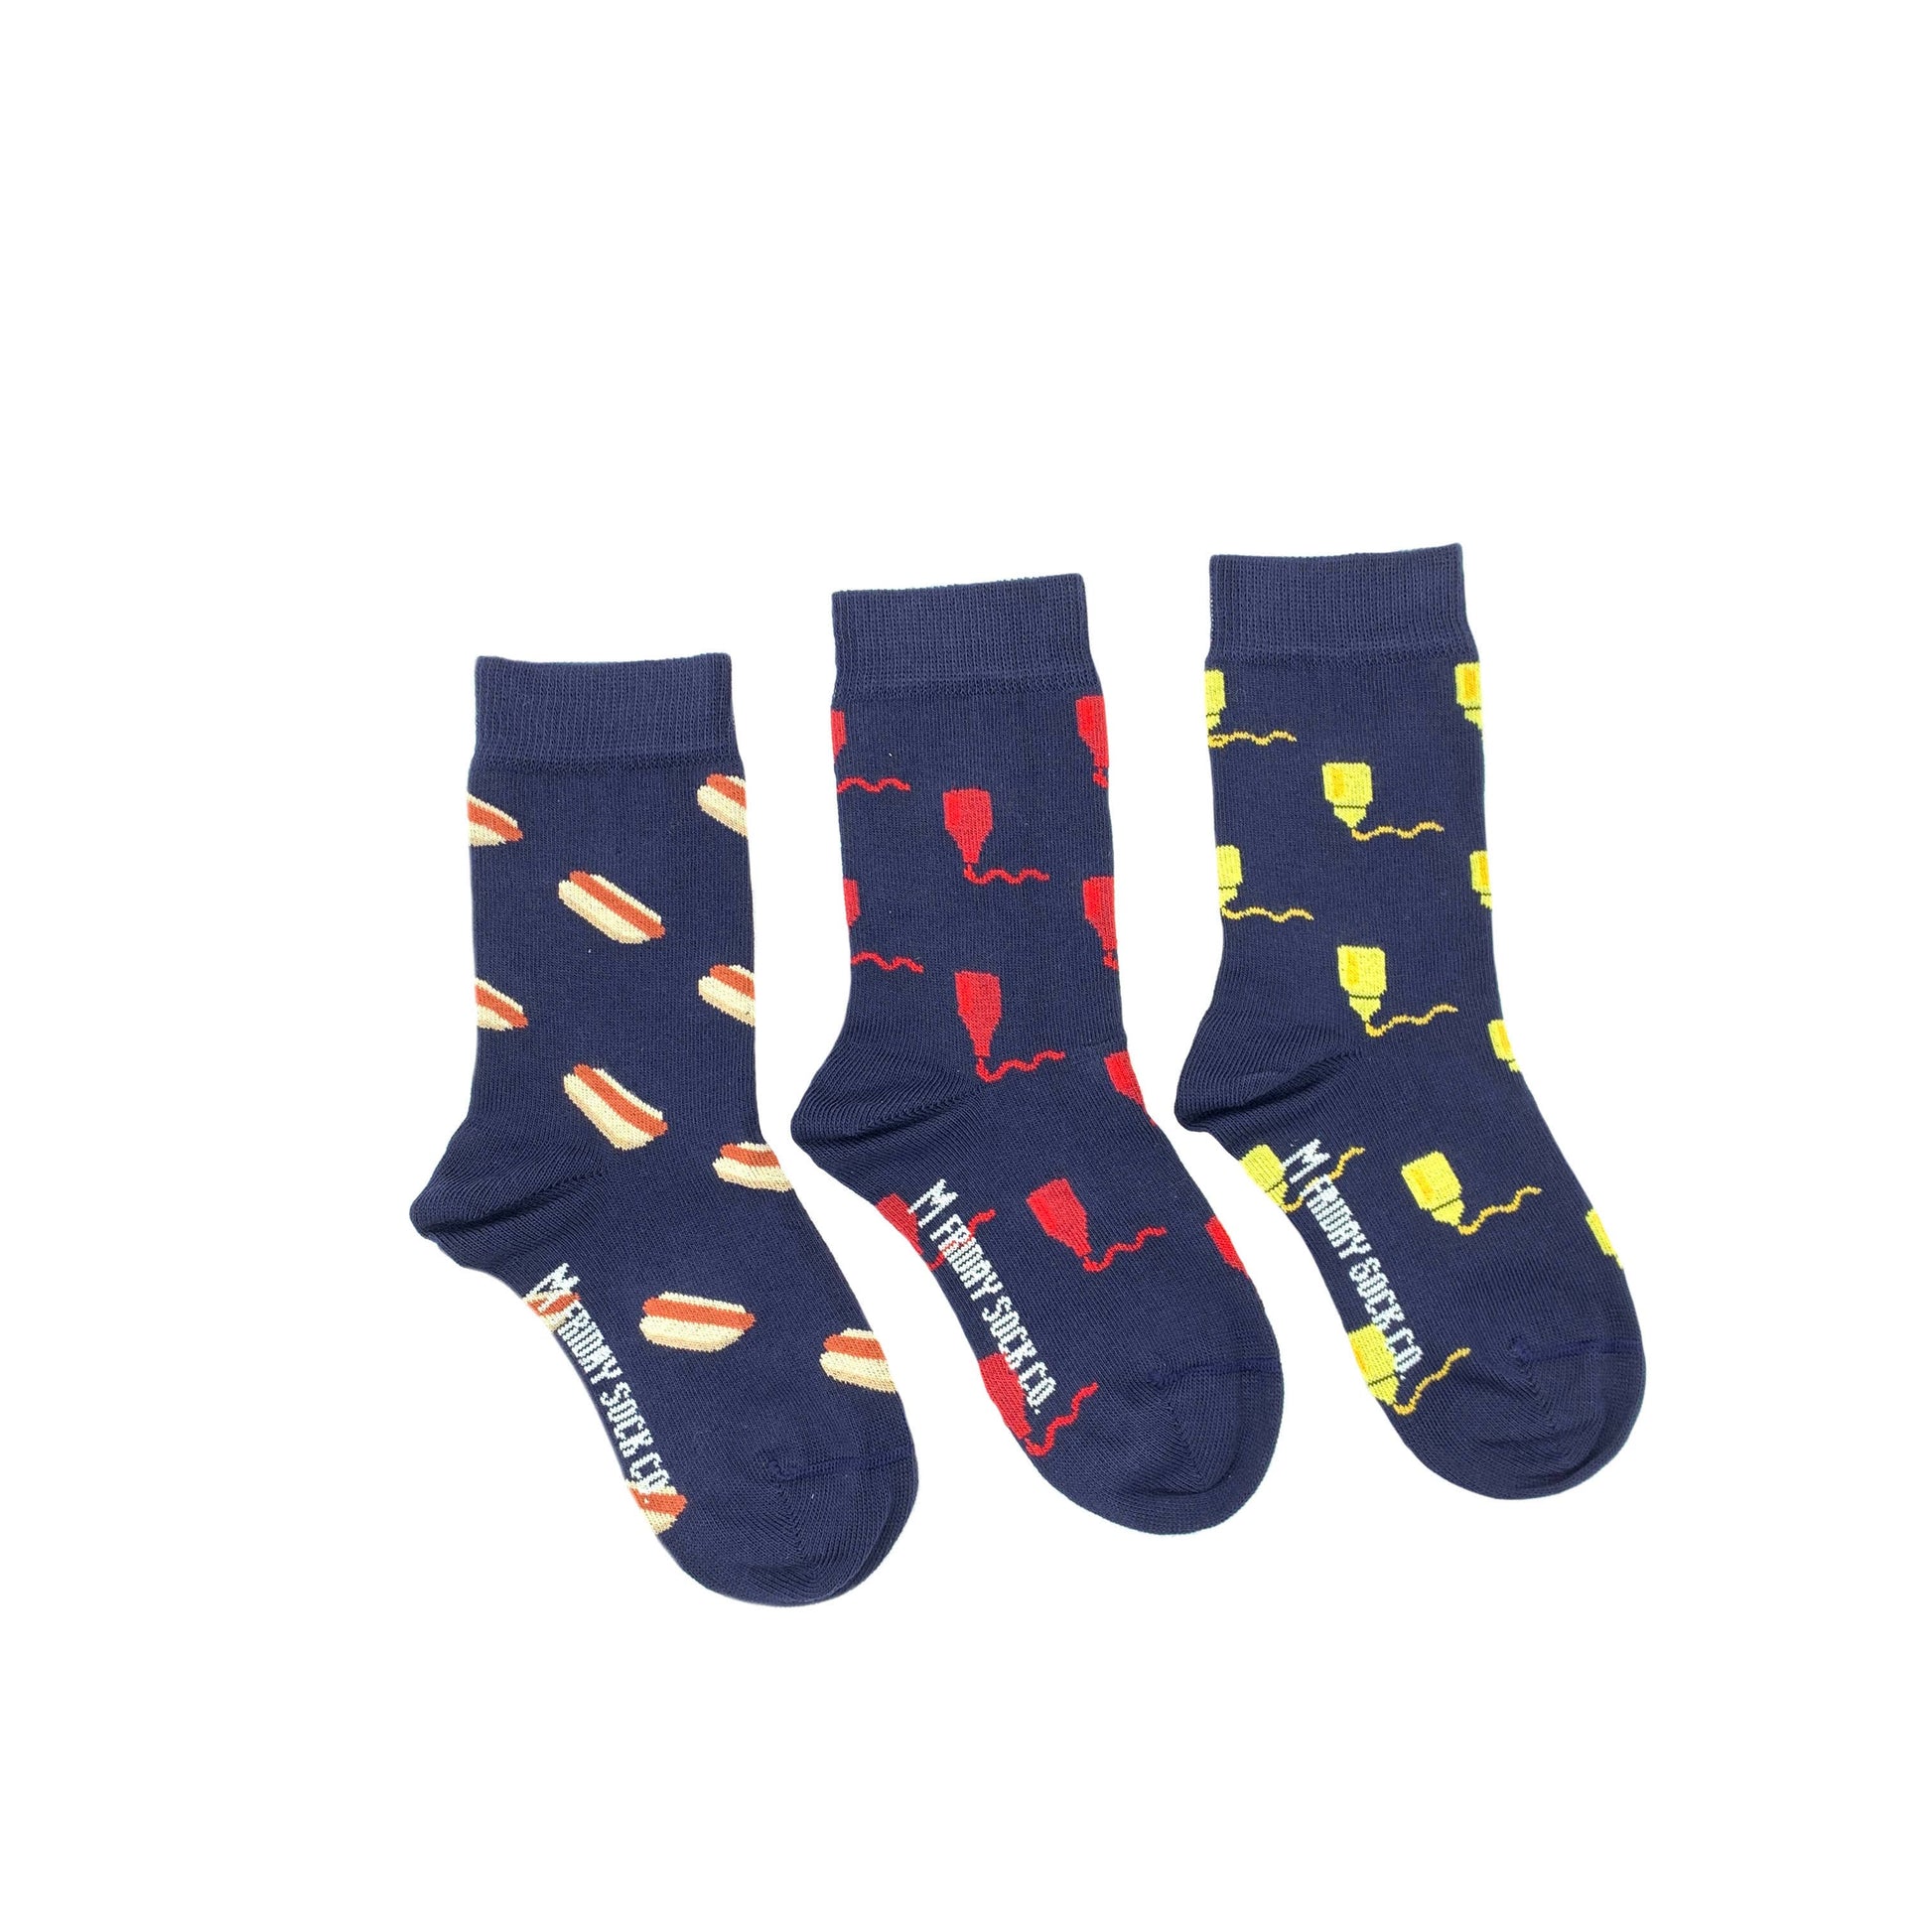 3 pair of mismatched kids socks -- all navy blue with hot dog, ketchup and mustard patterns